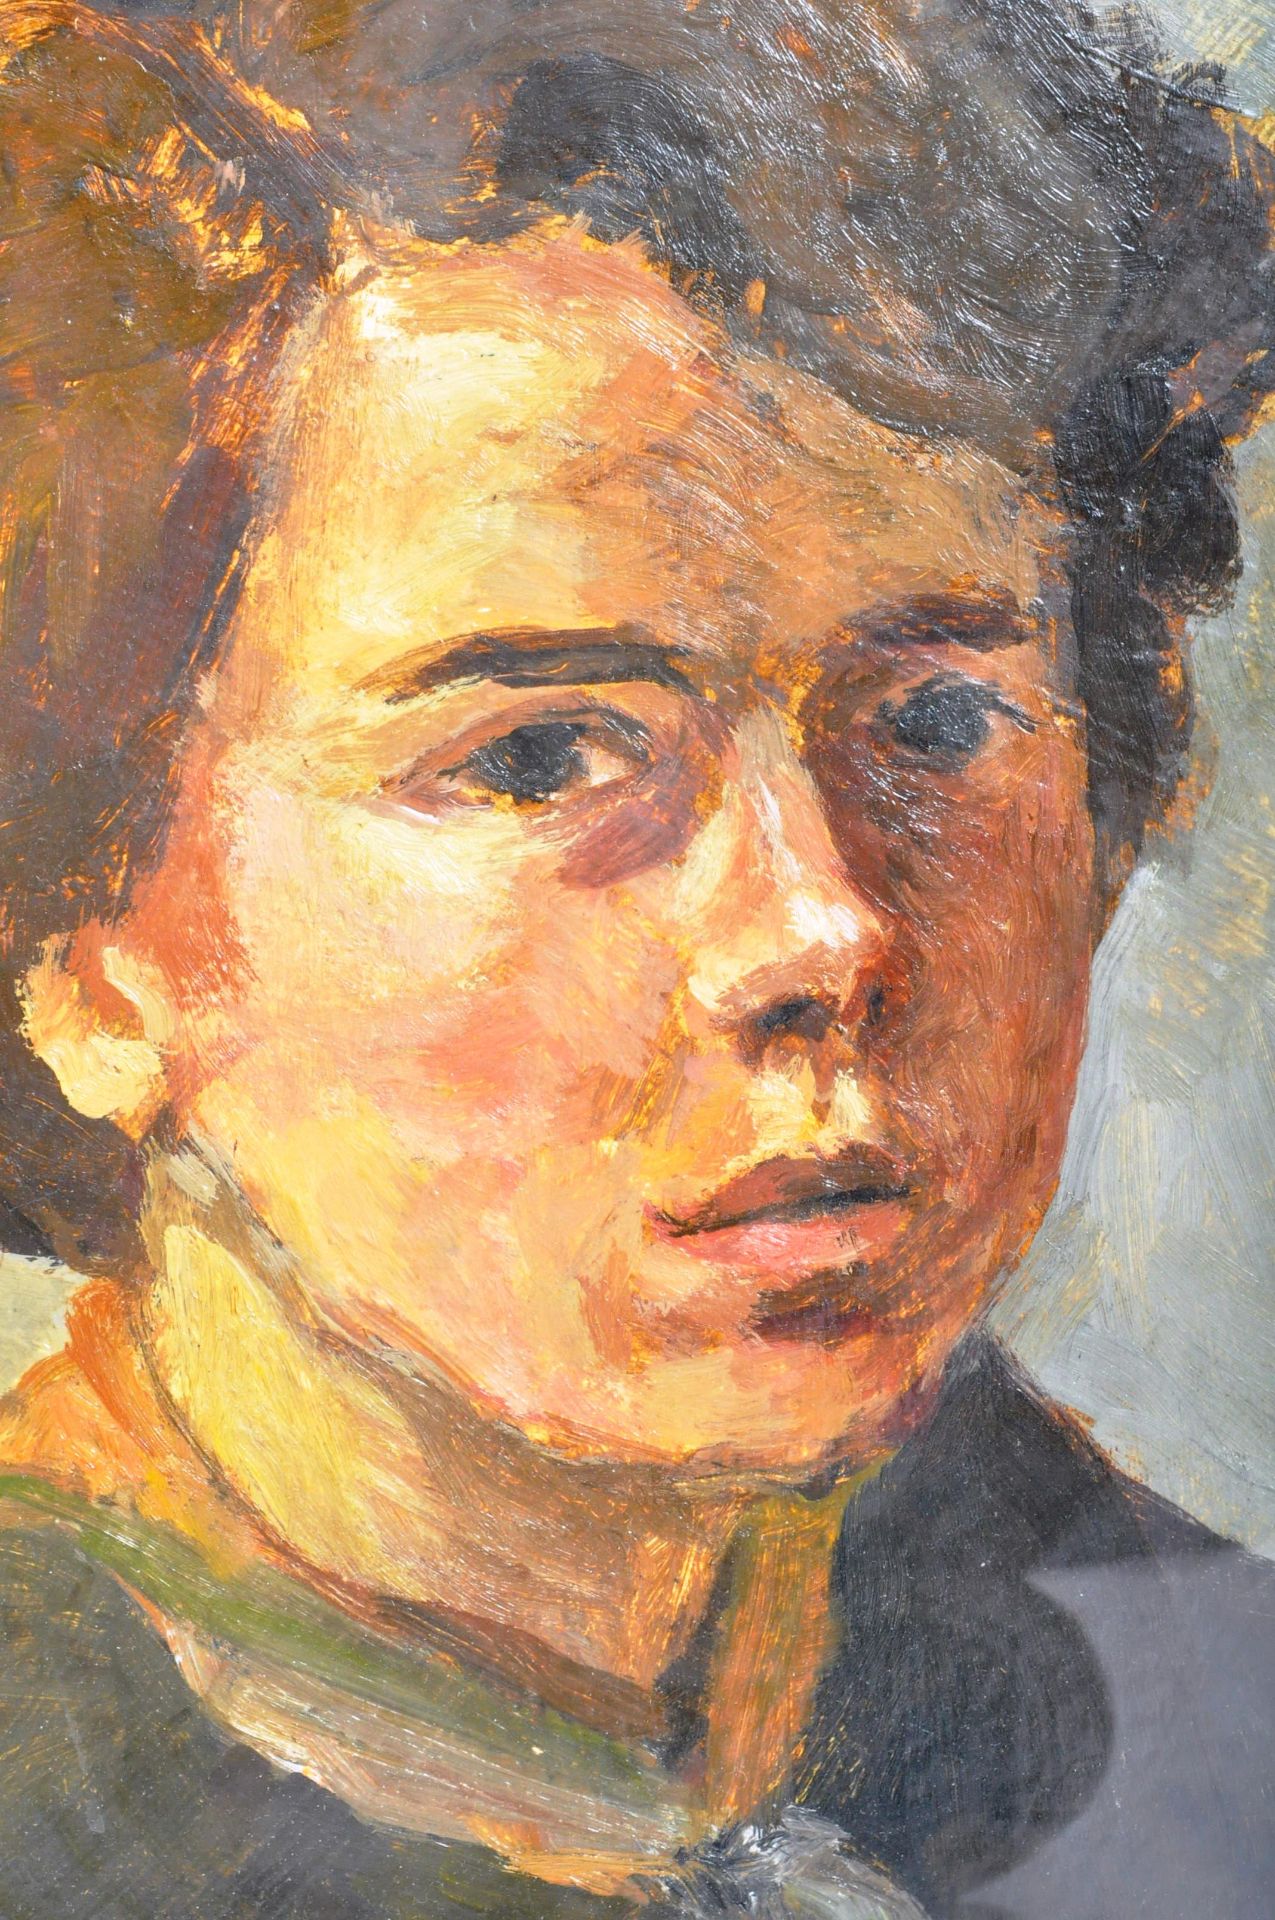 MID 20TH CENTURY OIL ON BOARD PORTRAIT PAINTING OF A YOUNG BOY - Image 4 of 6